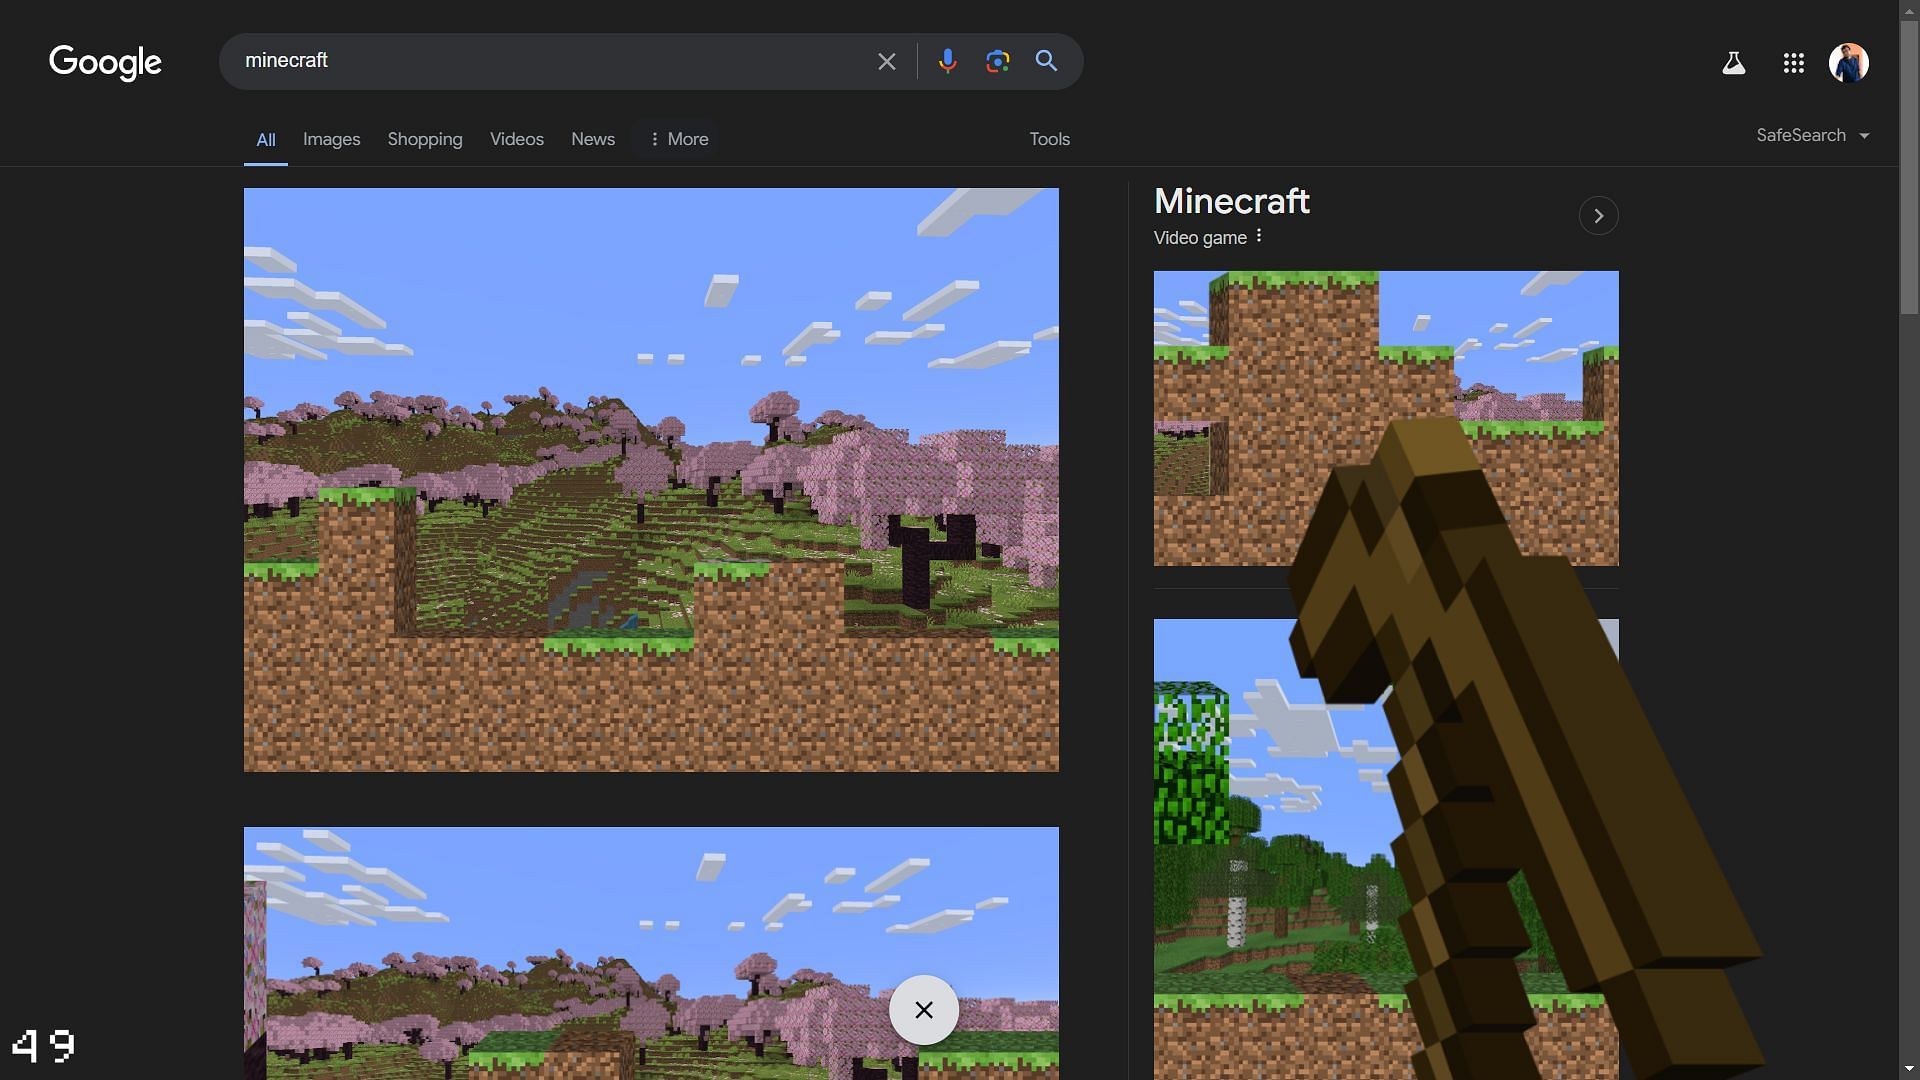 Searching Minecraft on Google starts a special hidden game (Image via Google)